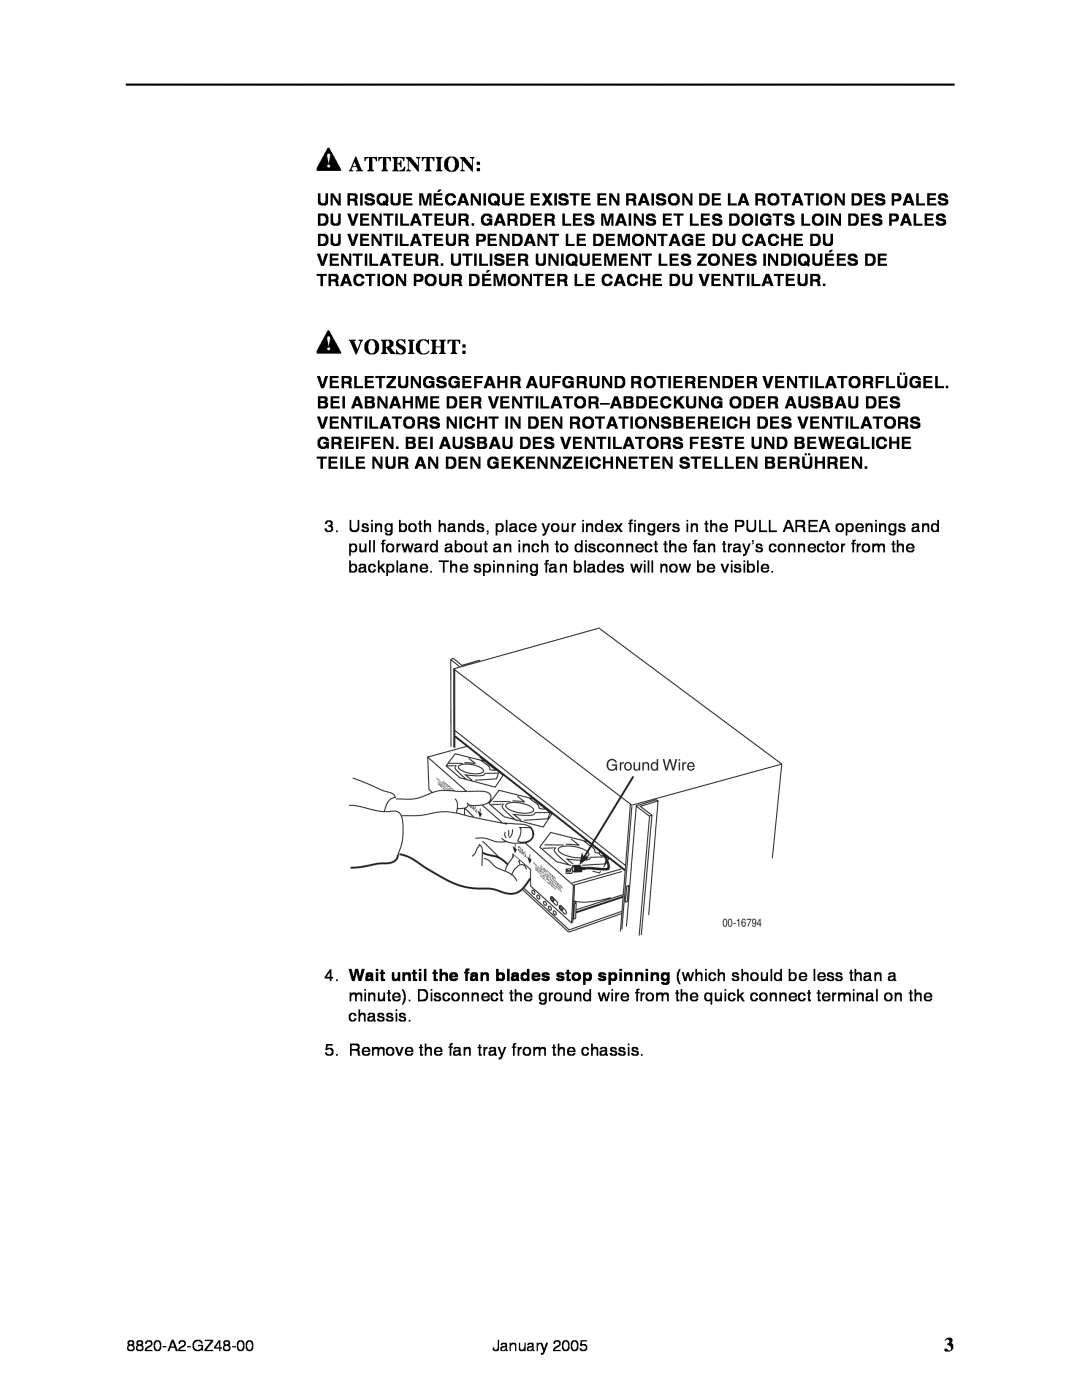 Paradyne 8820-S3-900 installation instructions Vorsicht, Remove the fan tray from the chassis 